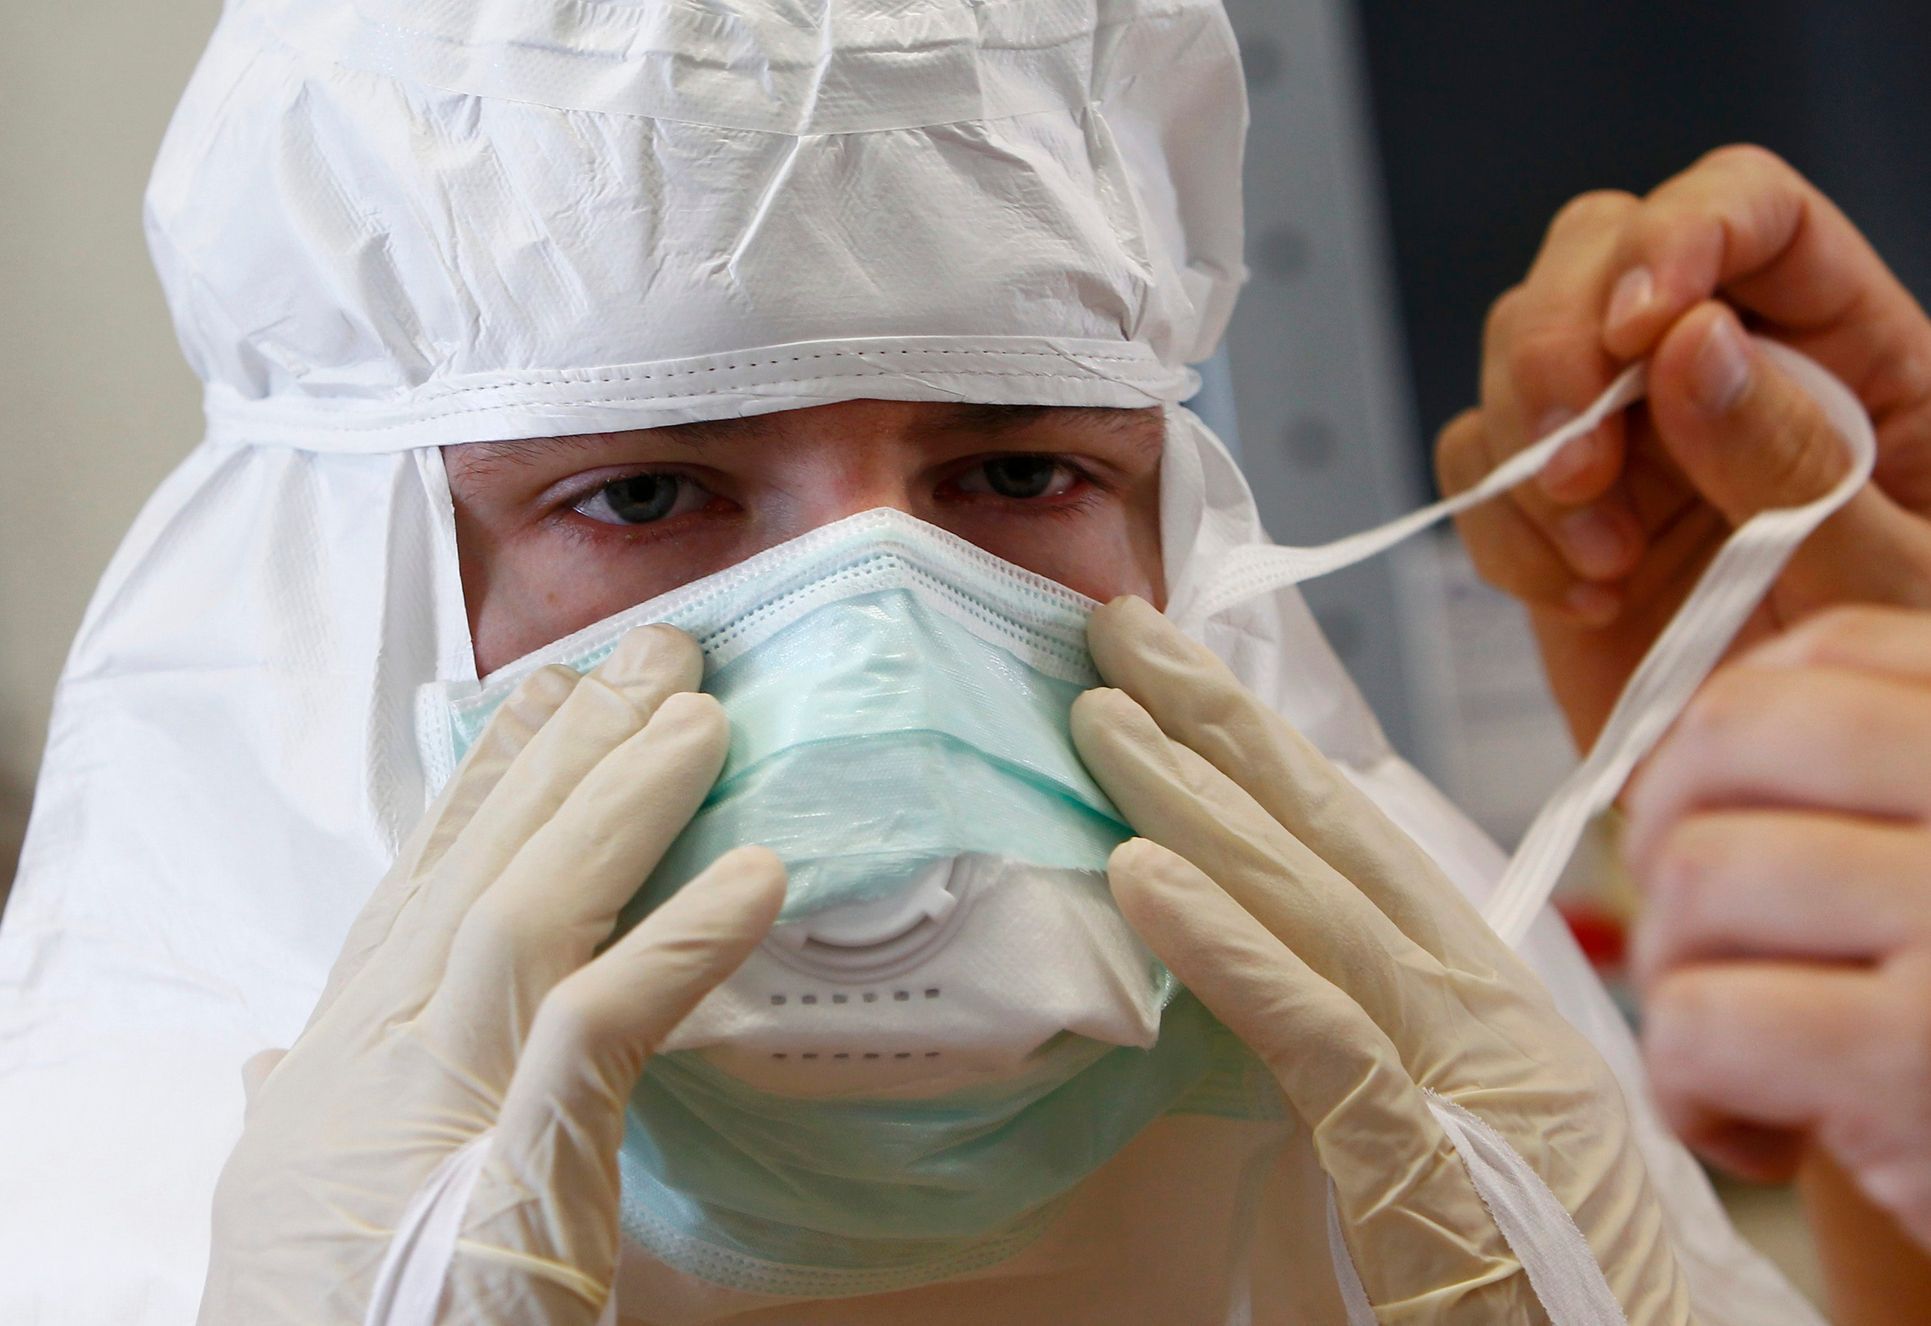 A volunteer has his mask adjusted during Red Cross Ebola training excercise in Wuerzburg